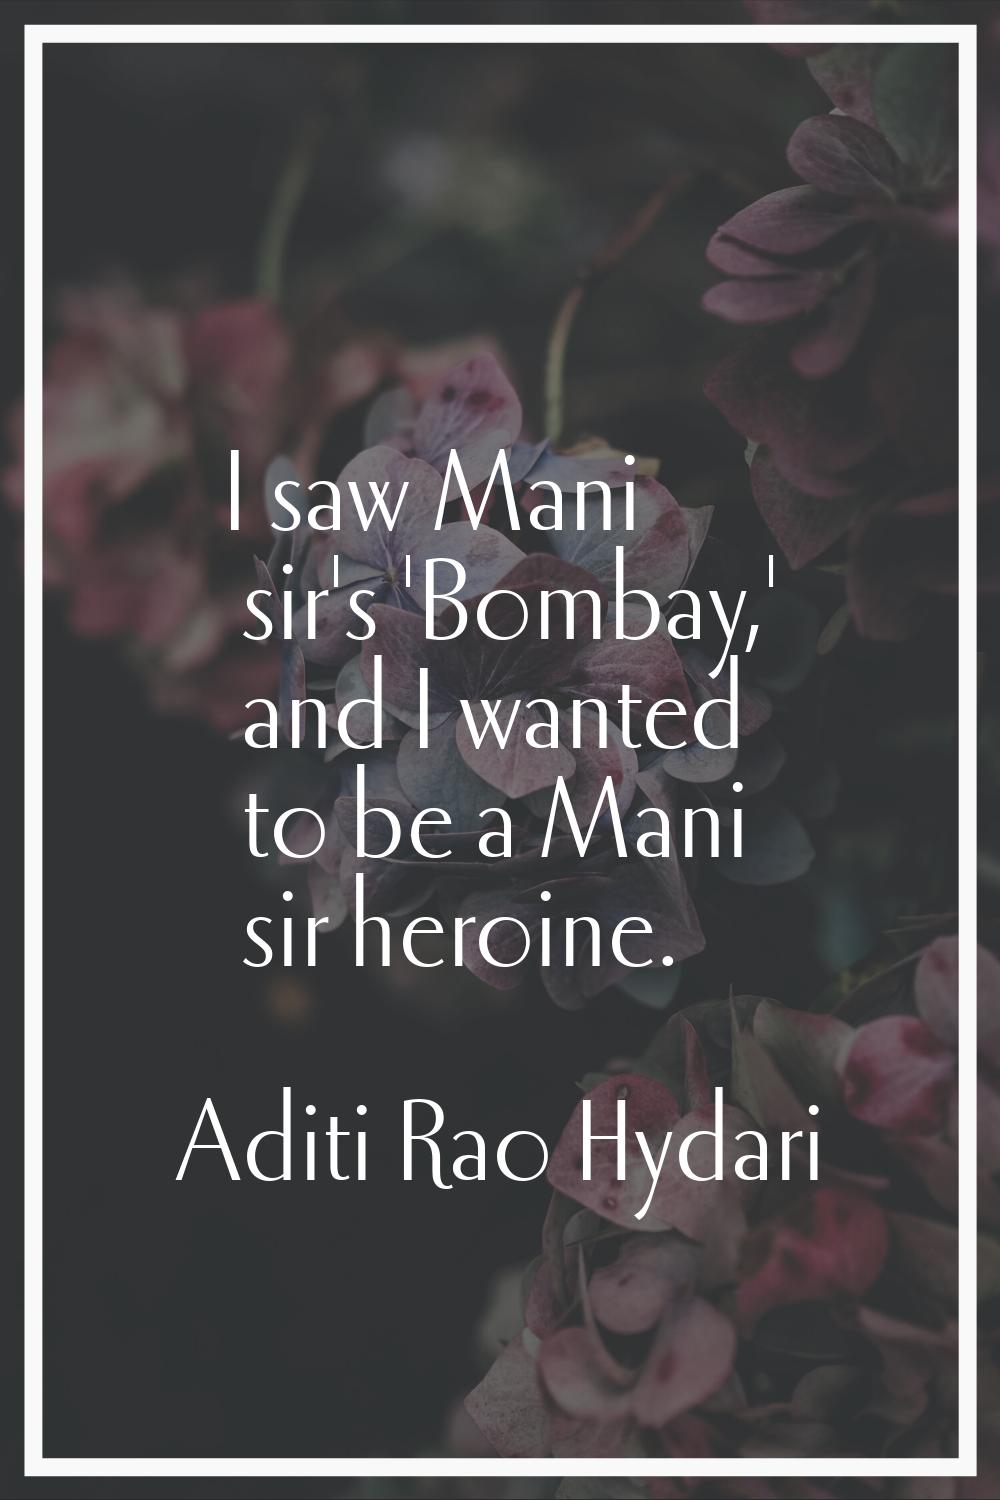 I saw Mani sir's 'Bombay,' and I wanted to be a Mani sir heroine.